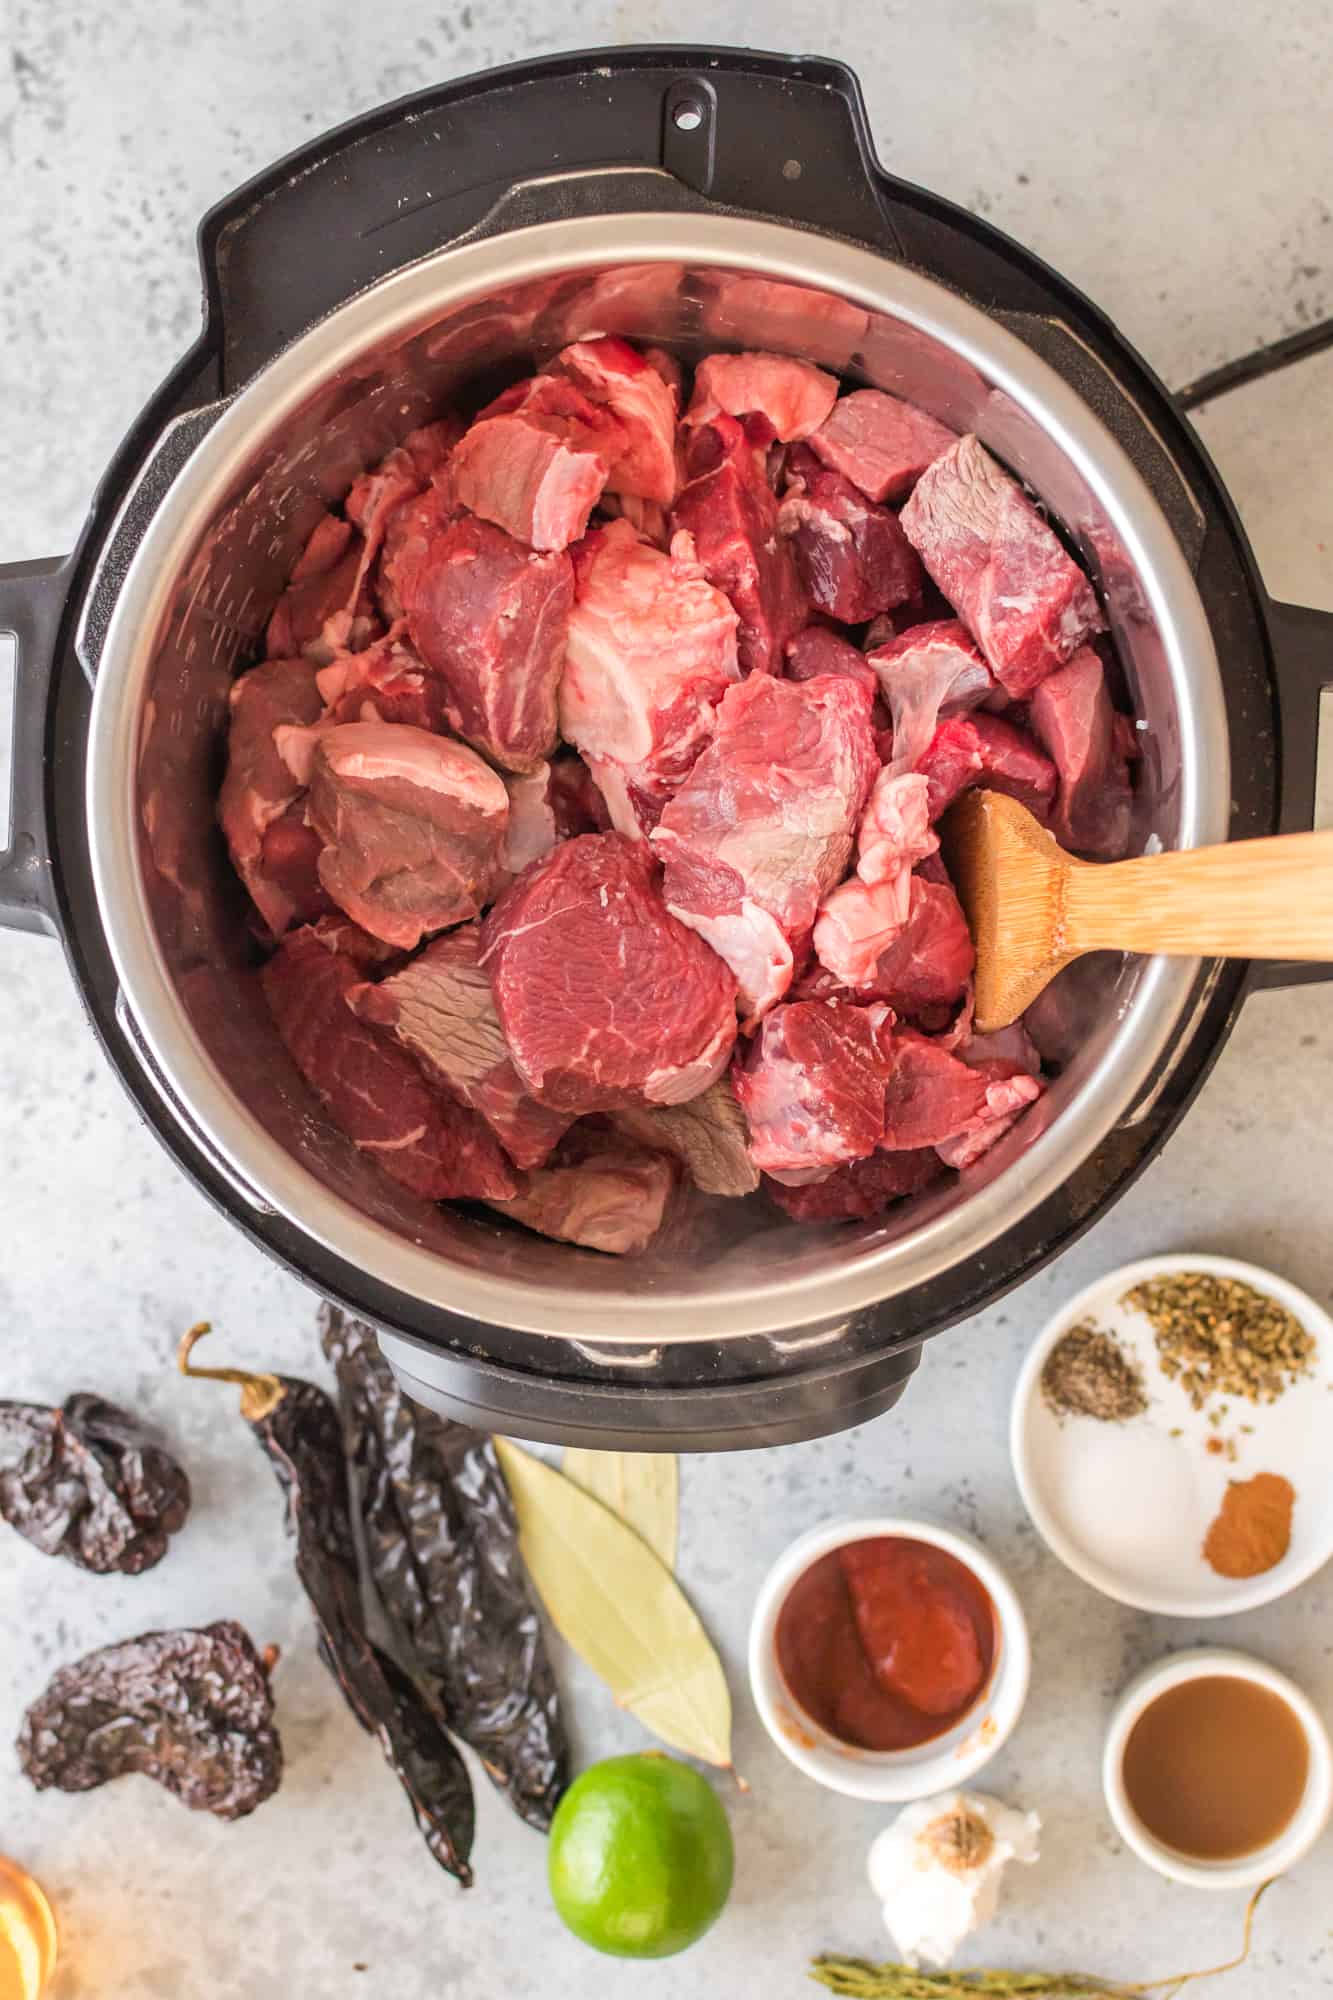 diced beef chunks placed in instant pot.